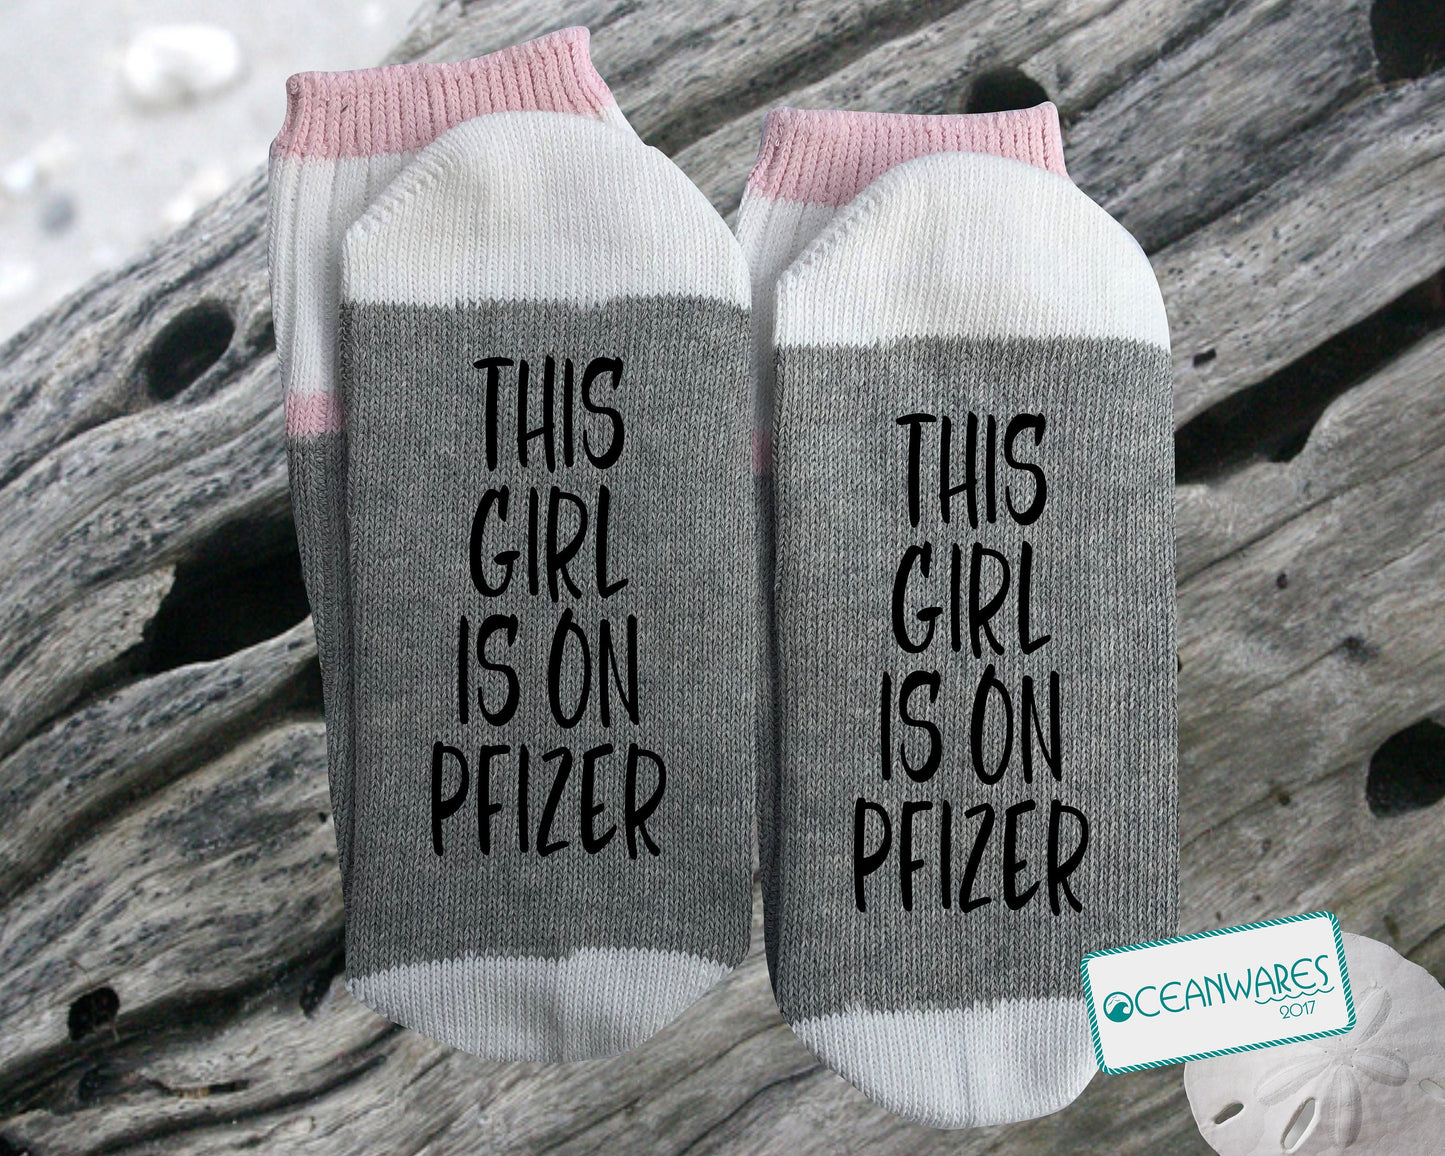 This Girl is on Pfizer, SUPER SOFT NOVELTY WORD SOCKS.